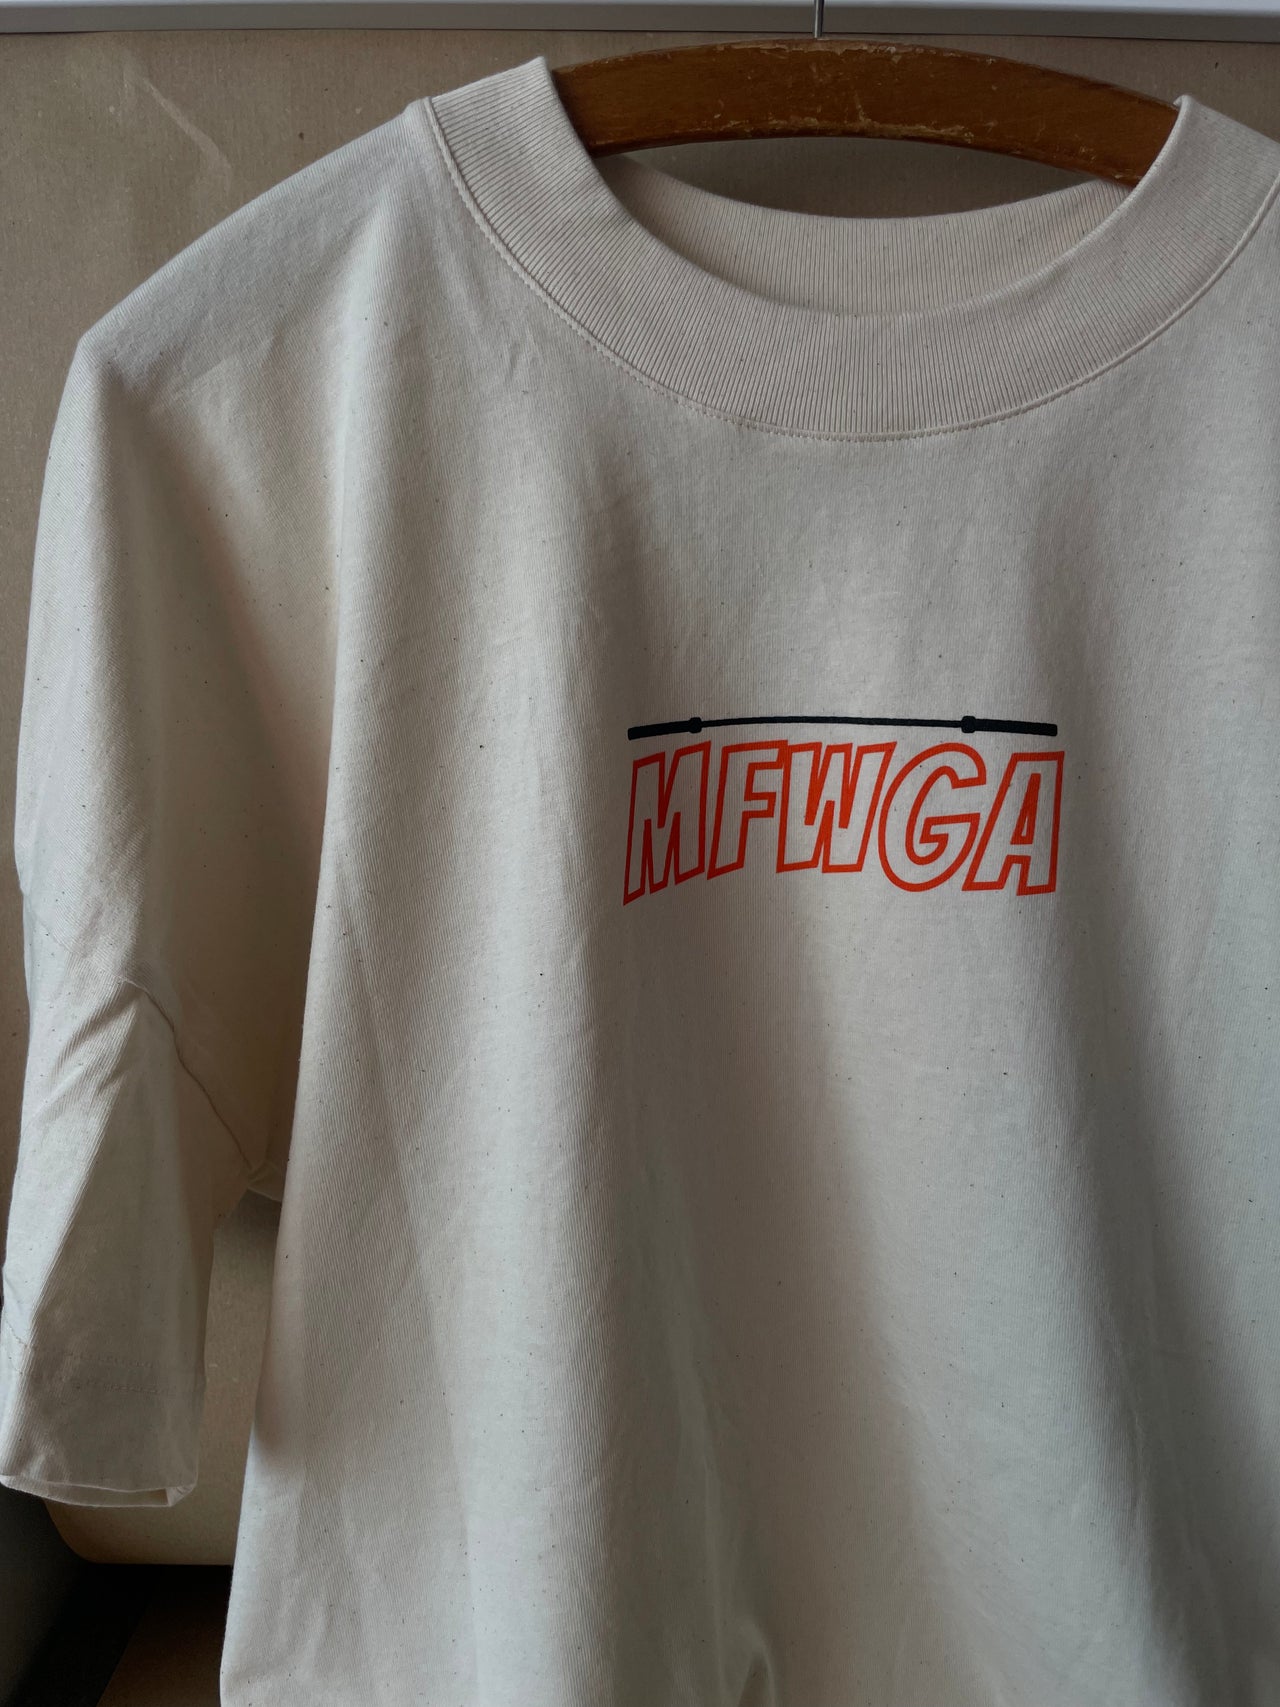 T-SHIRT Oversize "C&J WHAT YOU MUST" - MFWGA